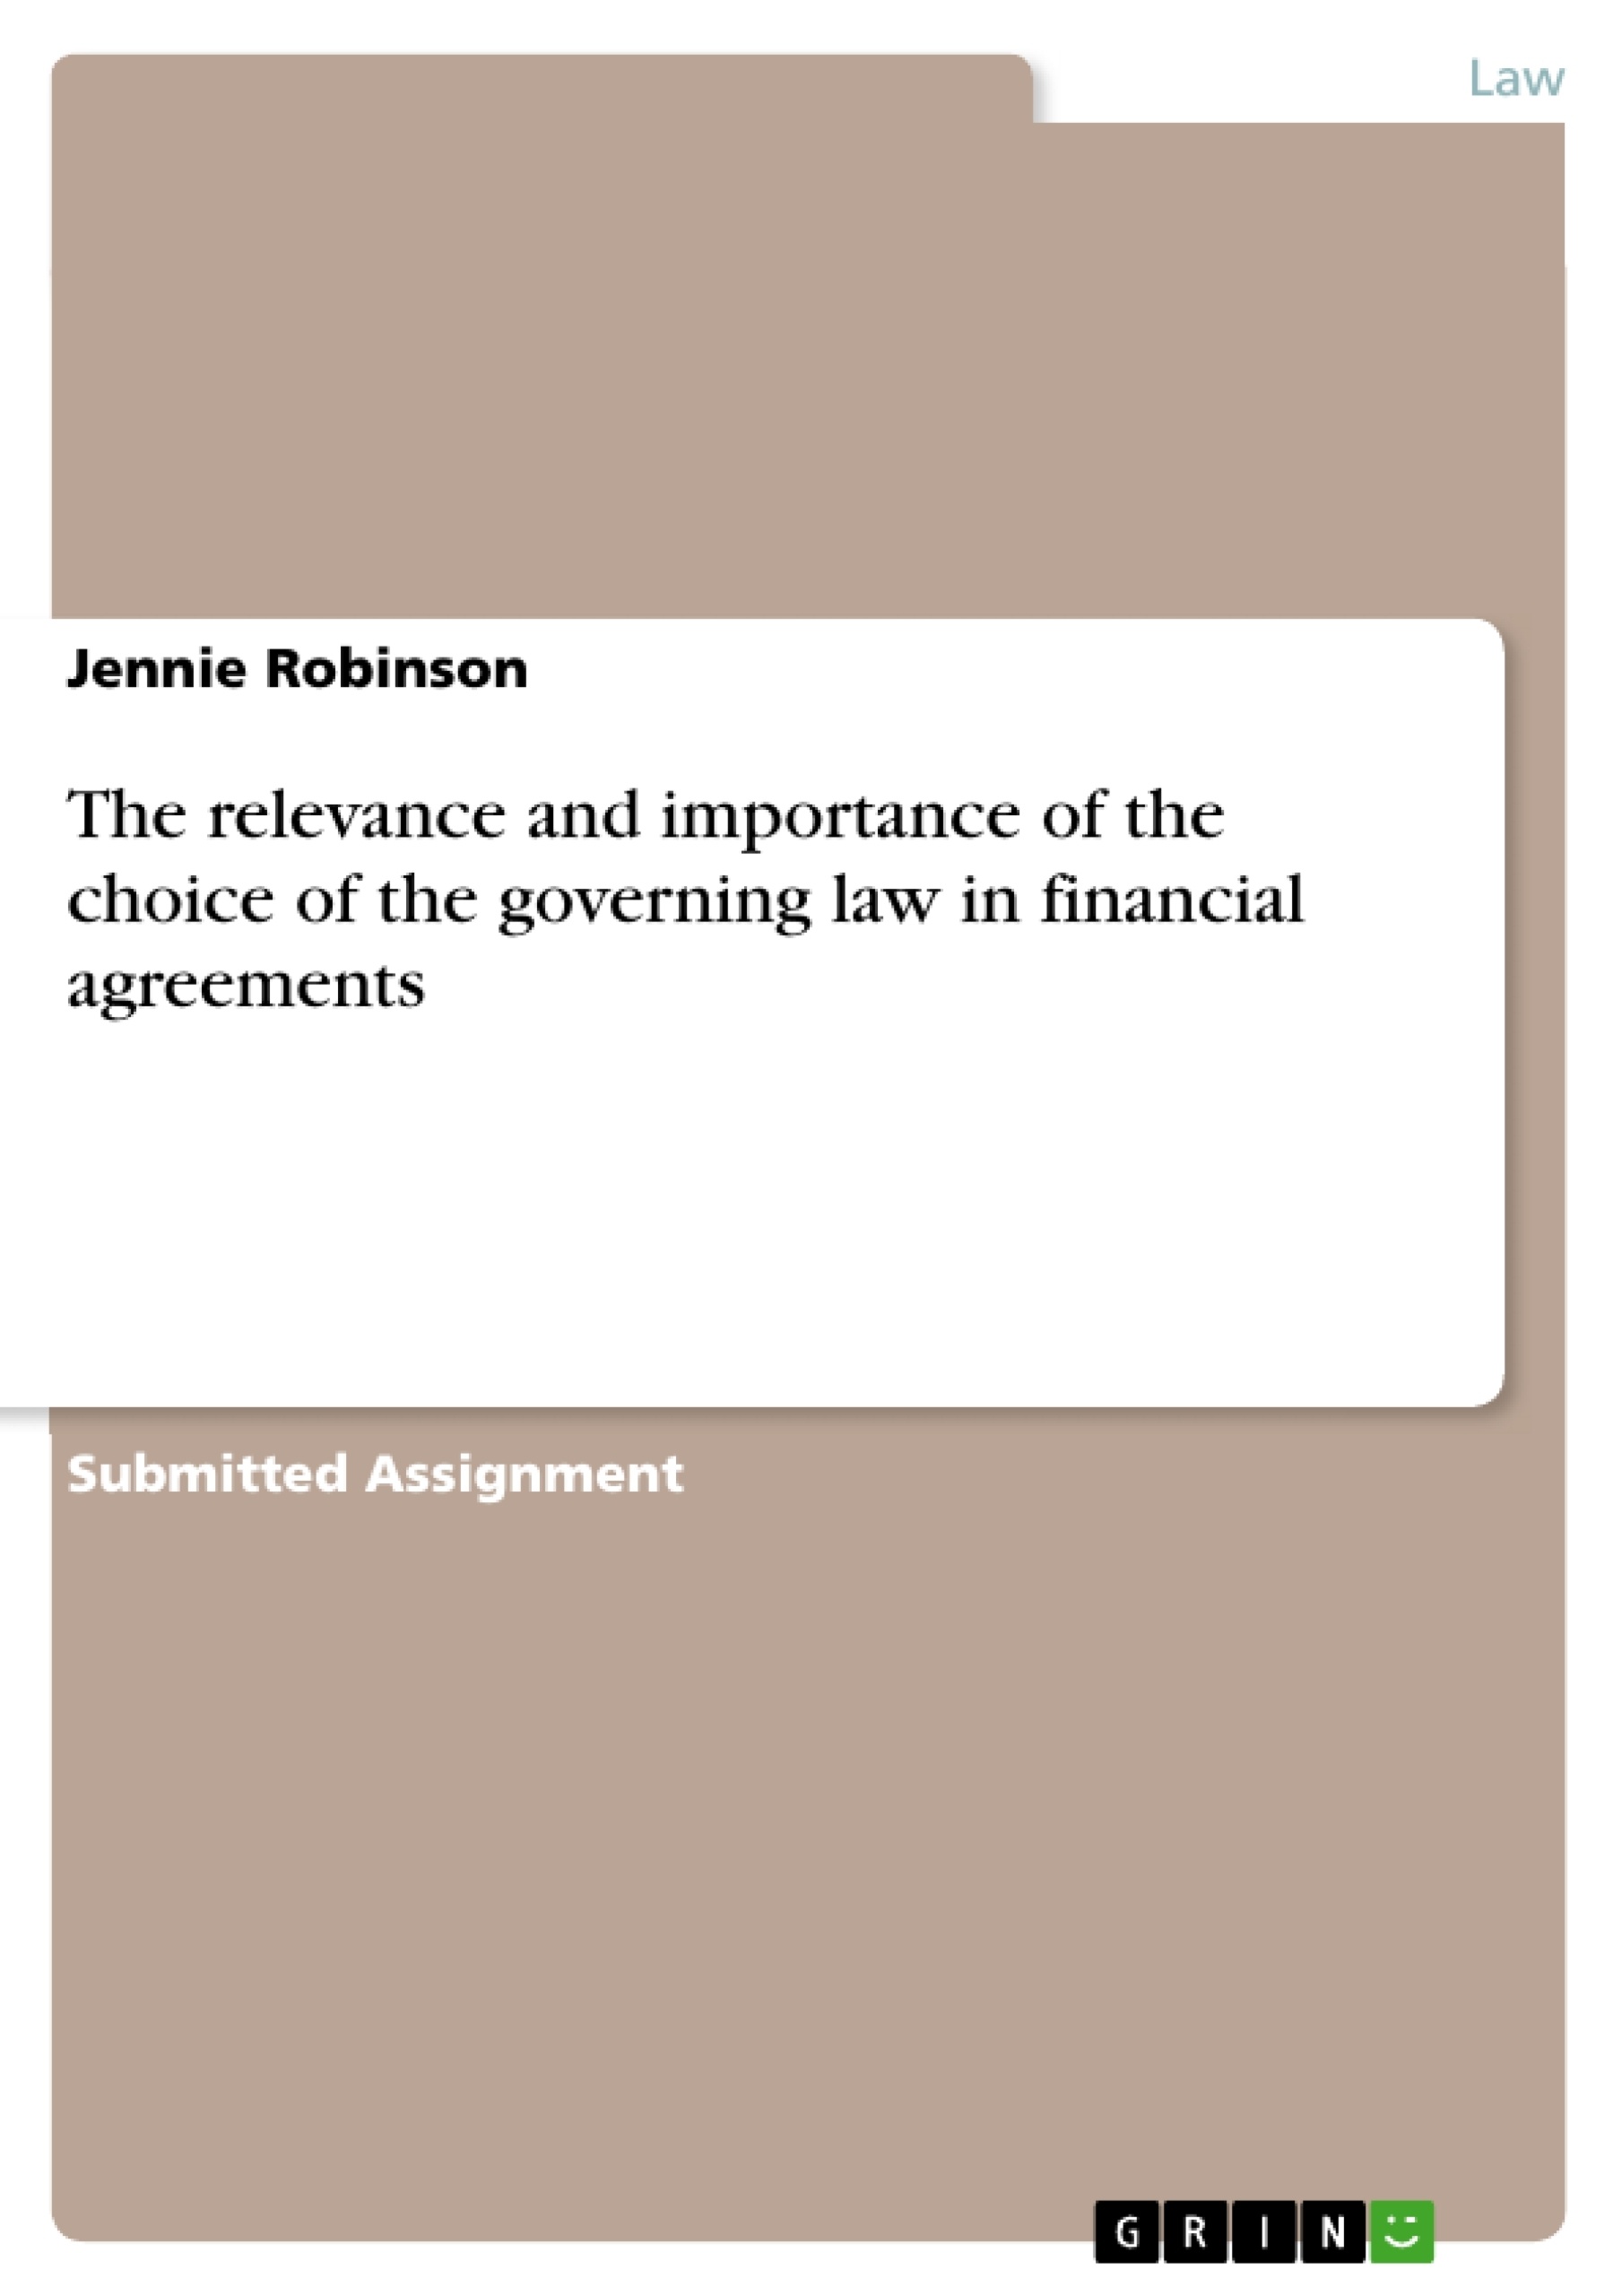 Title: The relevance and importance of the choice of the governing law in financial agreements